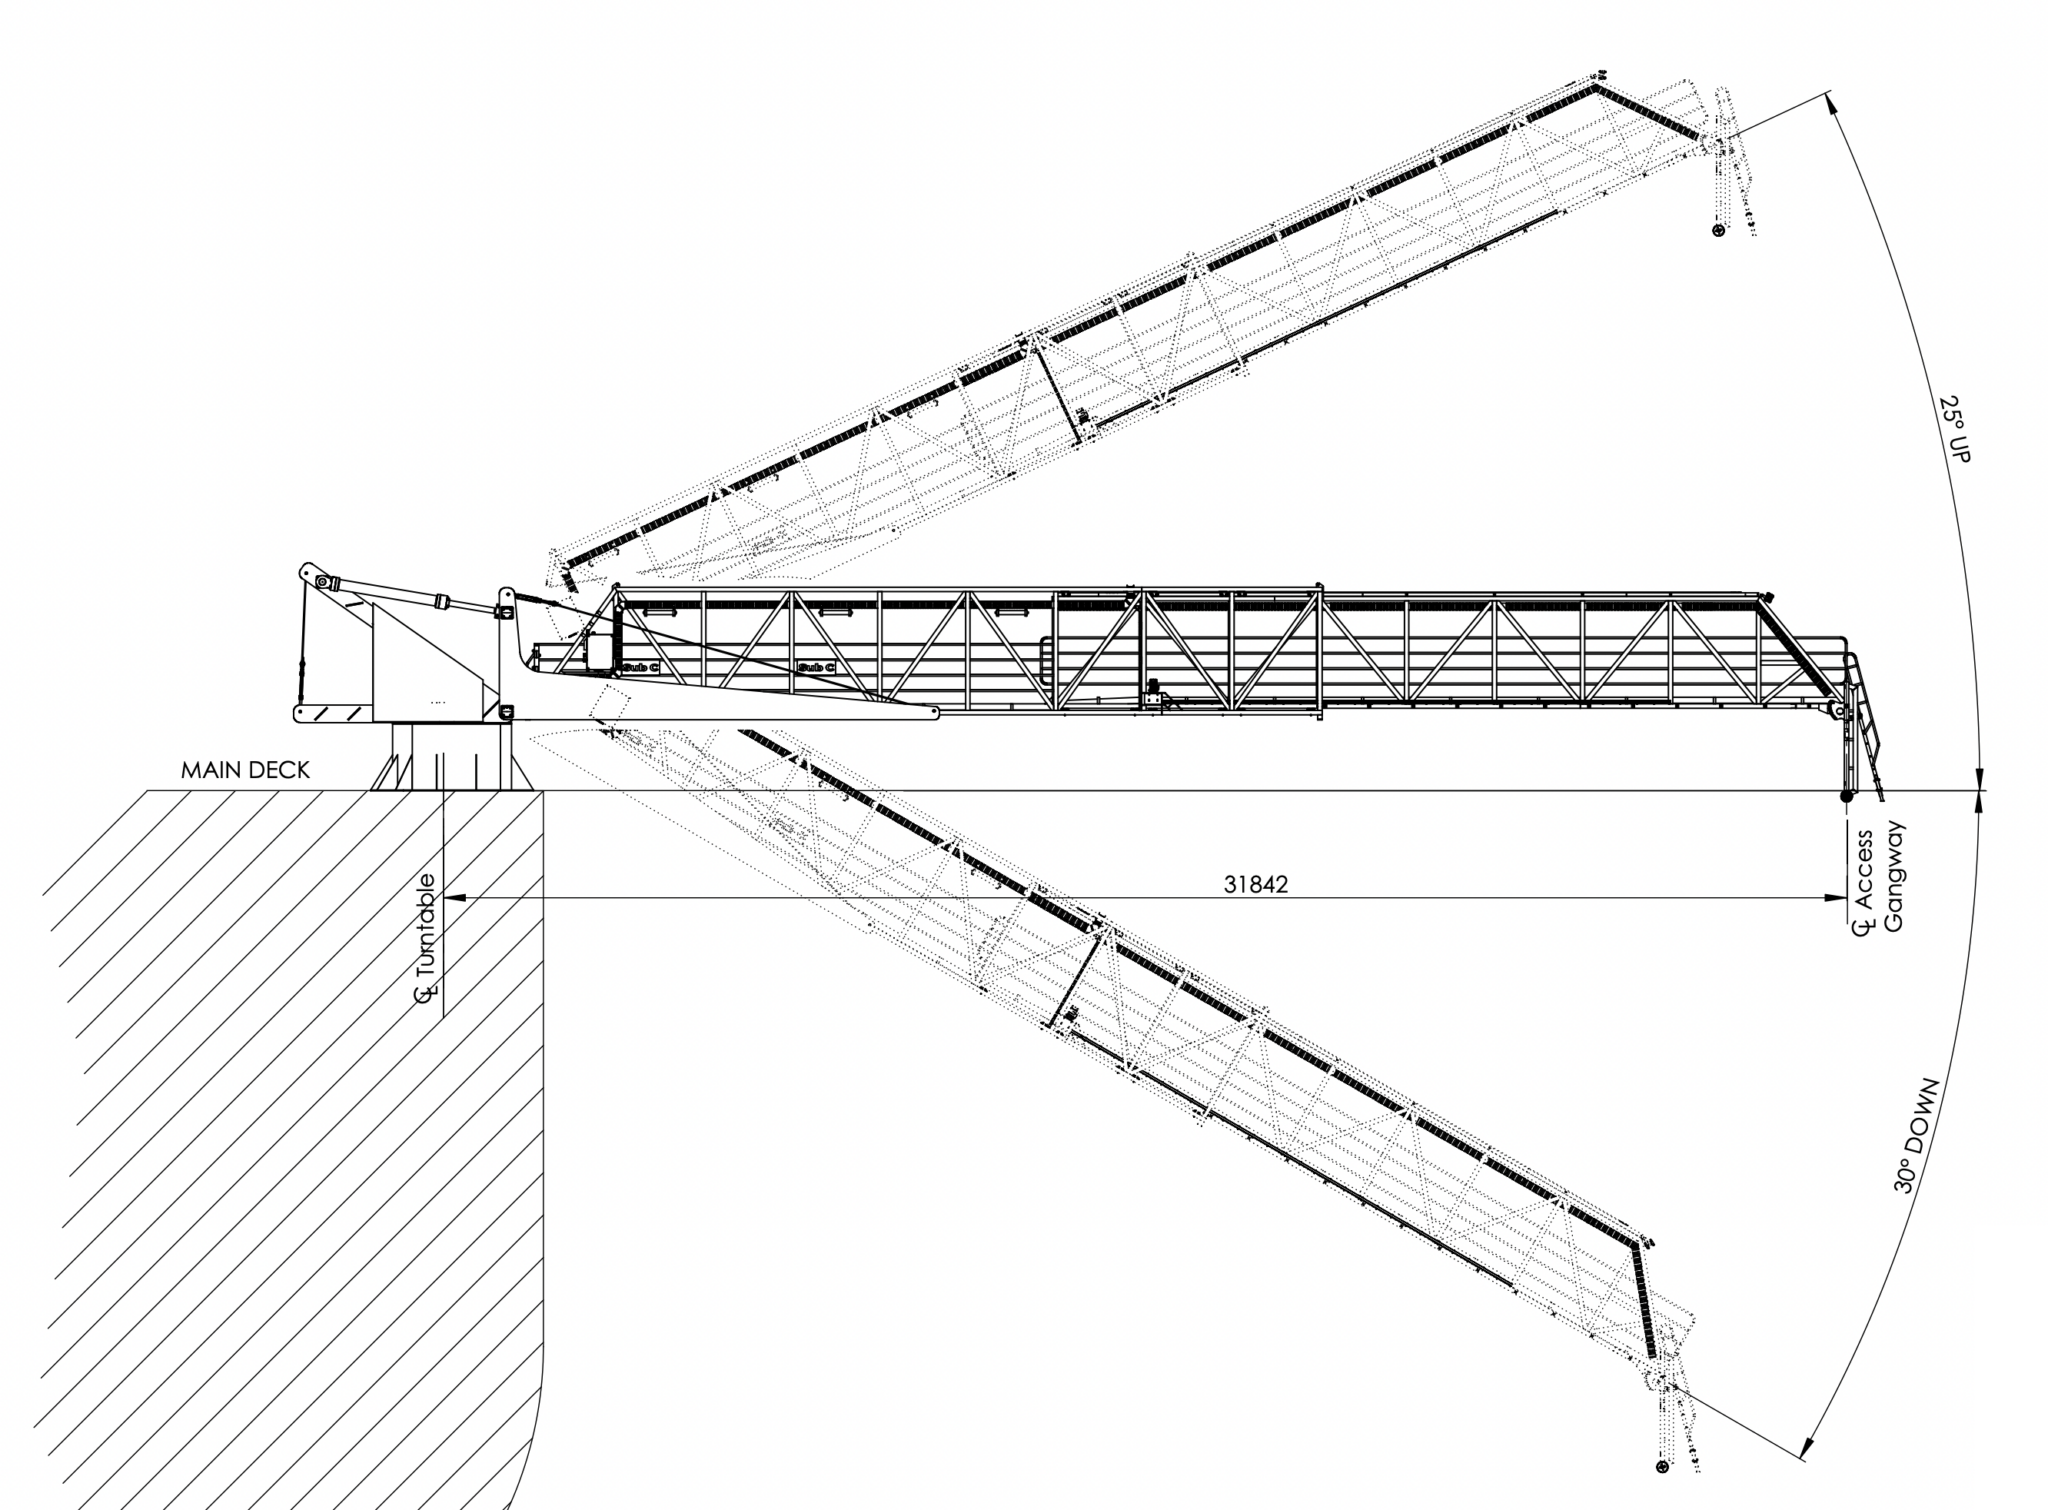 self-deployed-gangway-system-w2s-systems